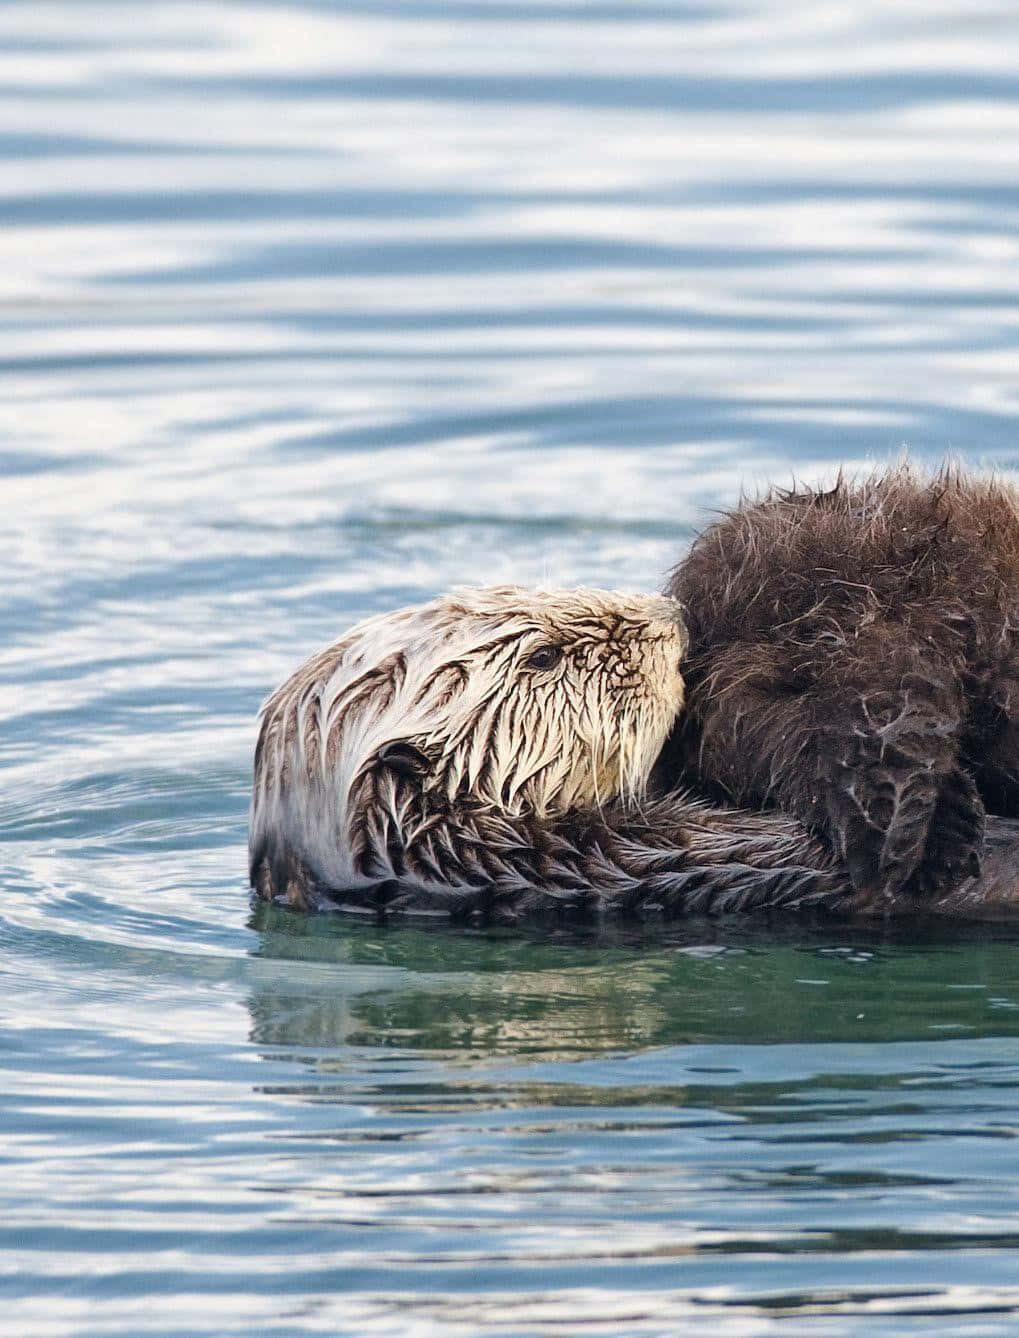 Adorable Otter Snuggling in its Habitat